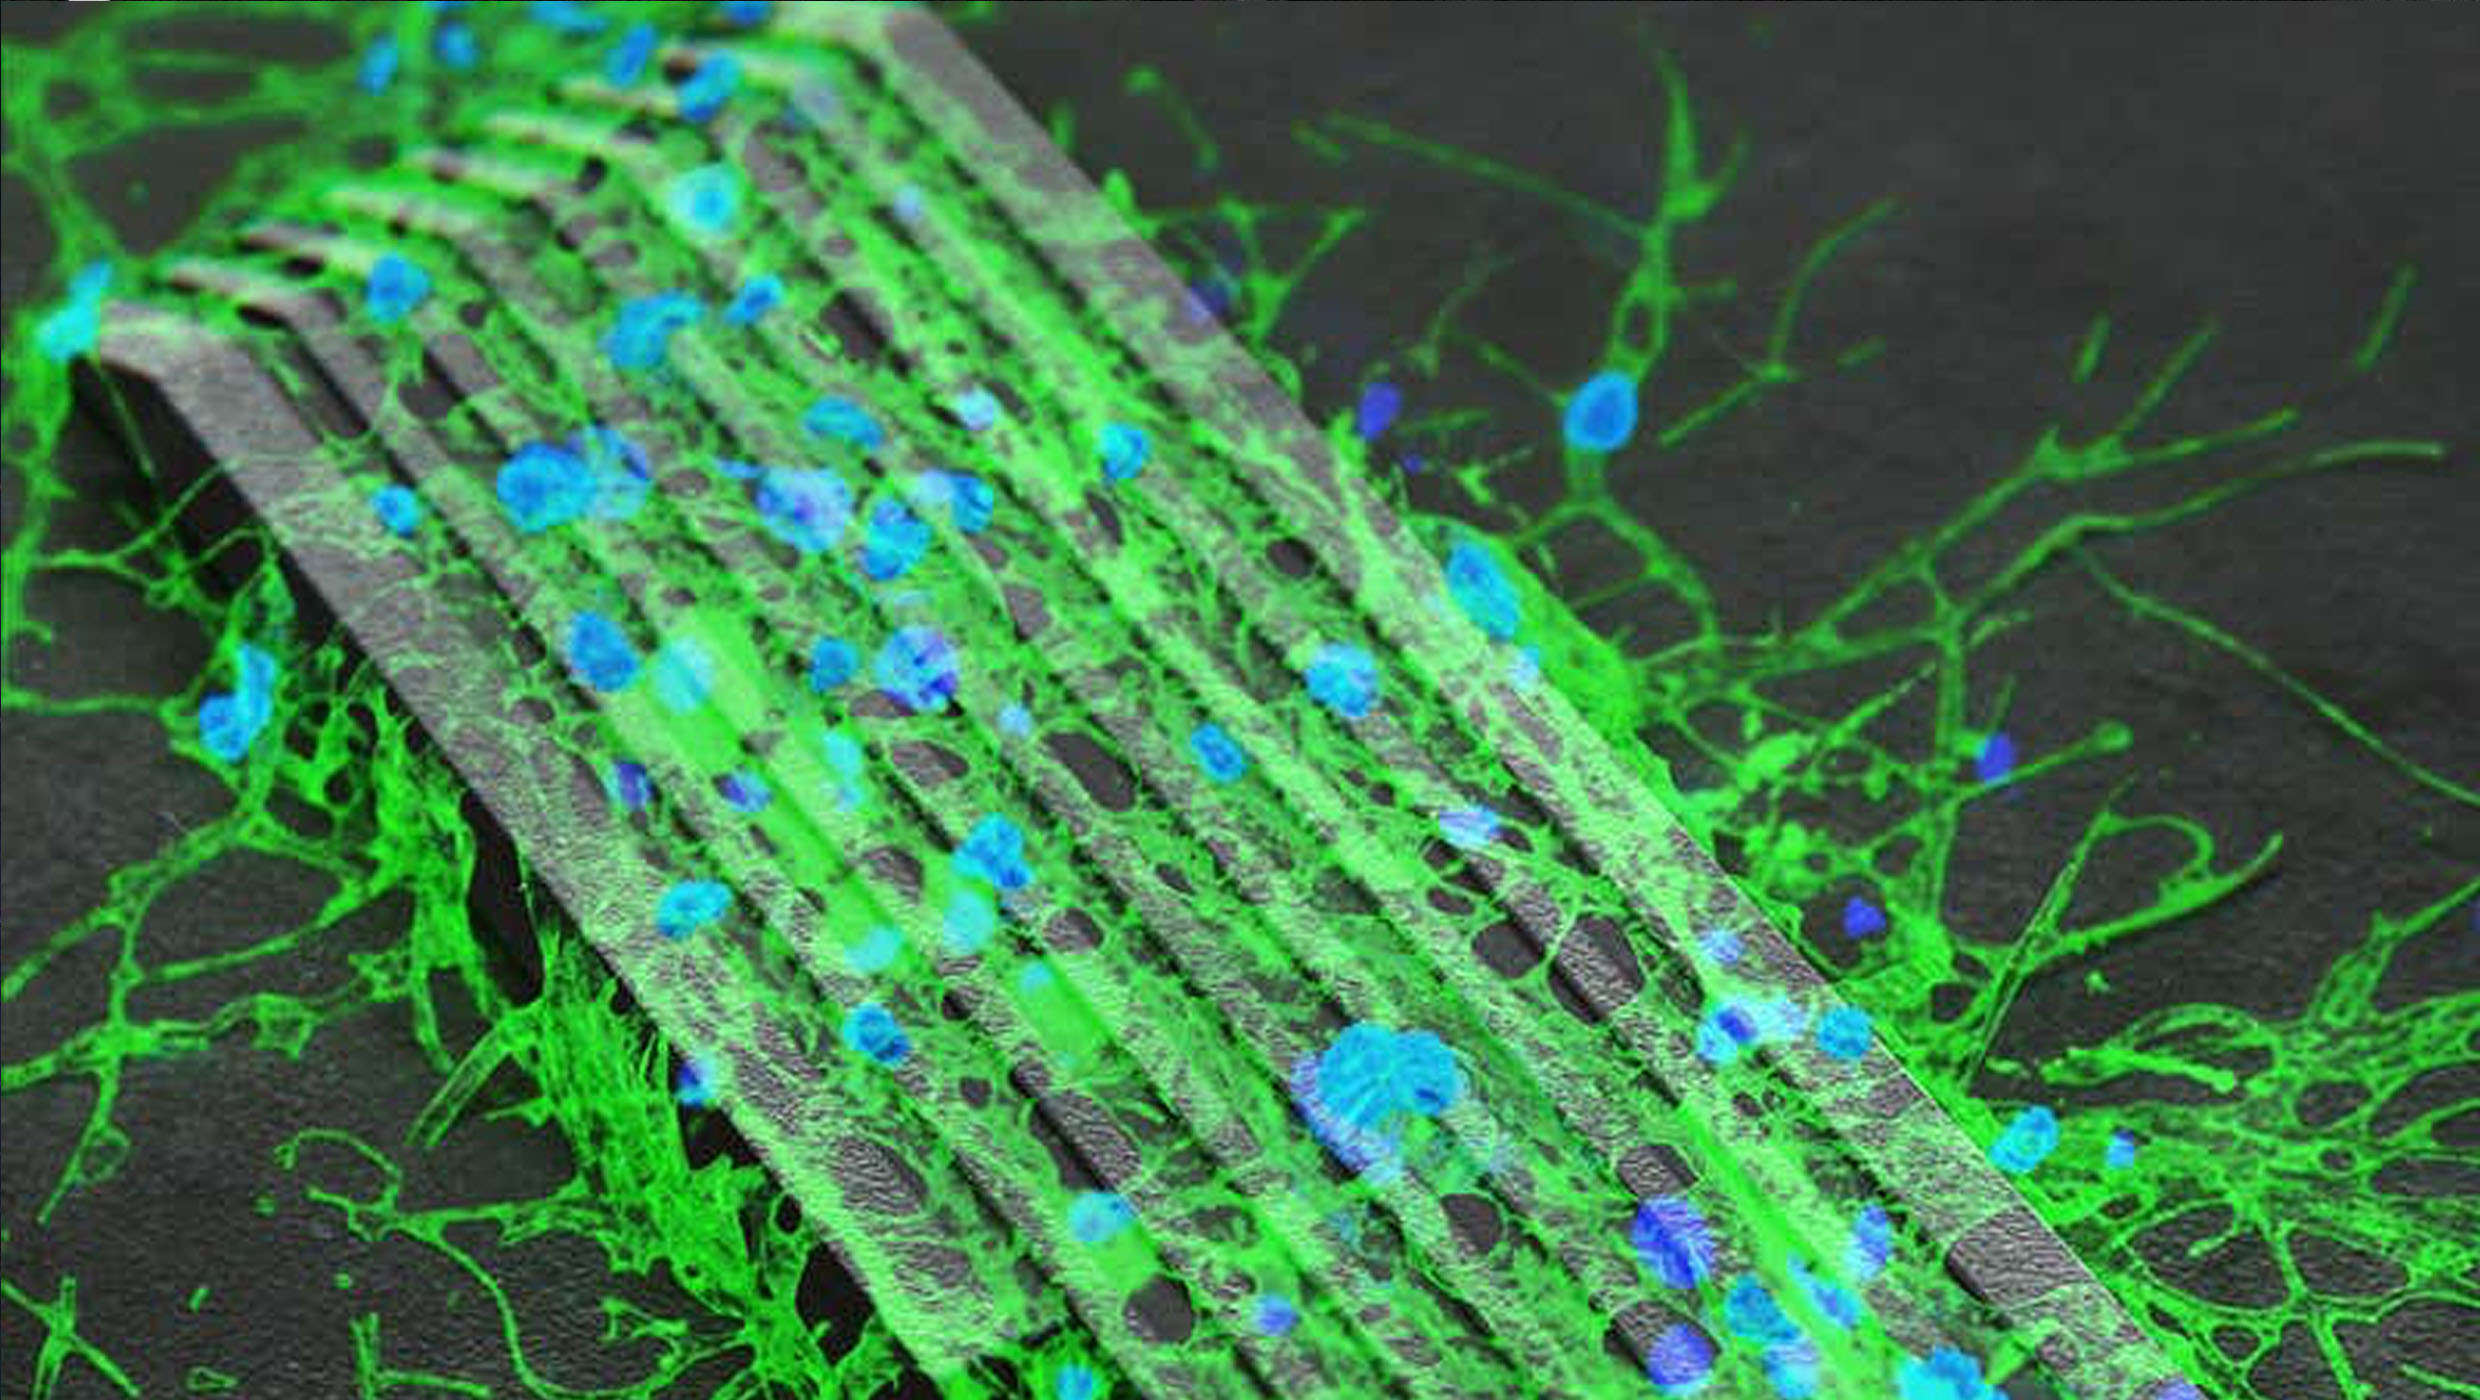 neurons growing over magnetic micro-bots